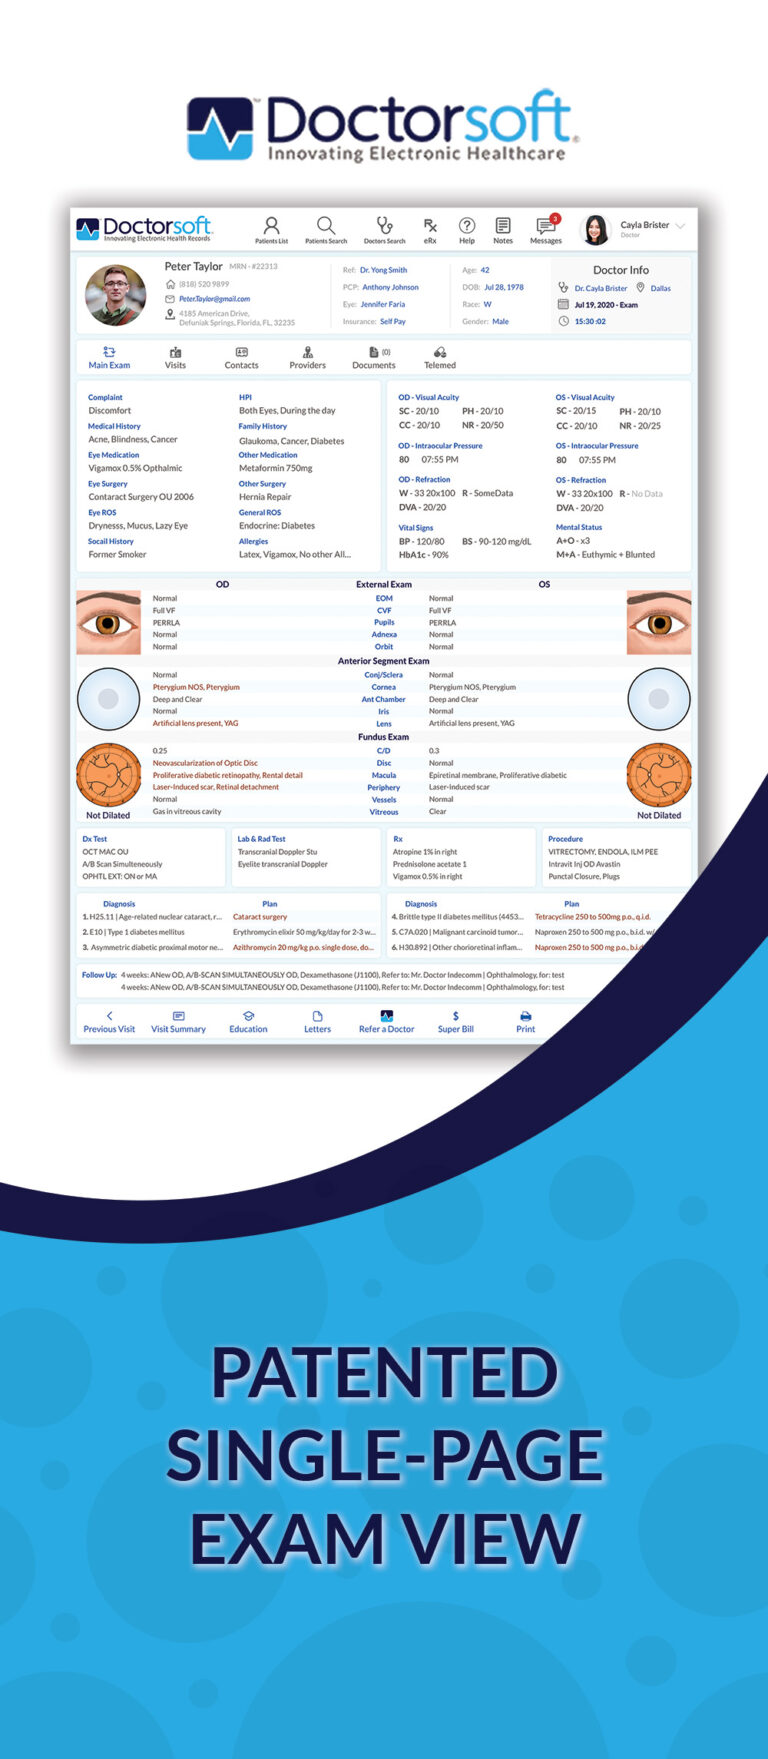 Doctorsoft Ophthalmic EHR's Patented Single-Page Exam View